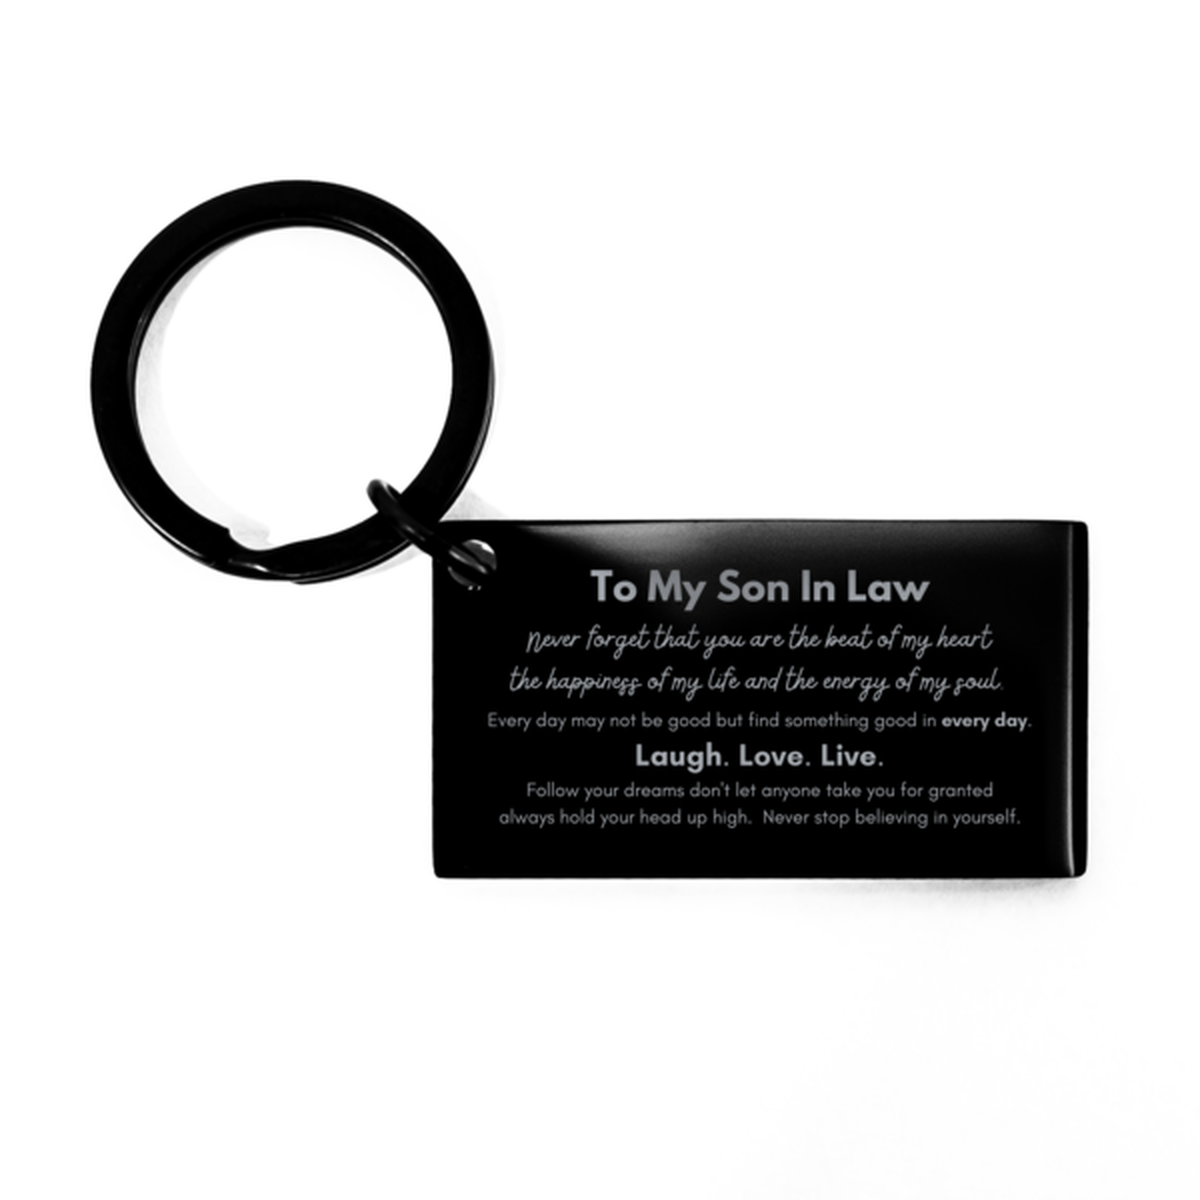 To My Son In Law Keyring Gifts, Christmas Son In Law Keychain Present, Birthday Unique Motivational For Son In Law, To My Son In Law Never forget that you are the beat of my heart the happiness of my life and the energy of my soul